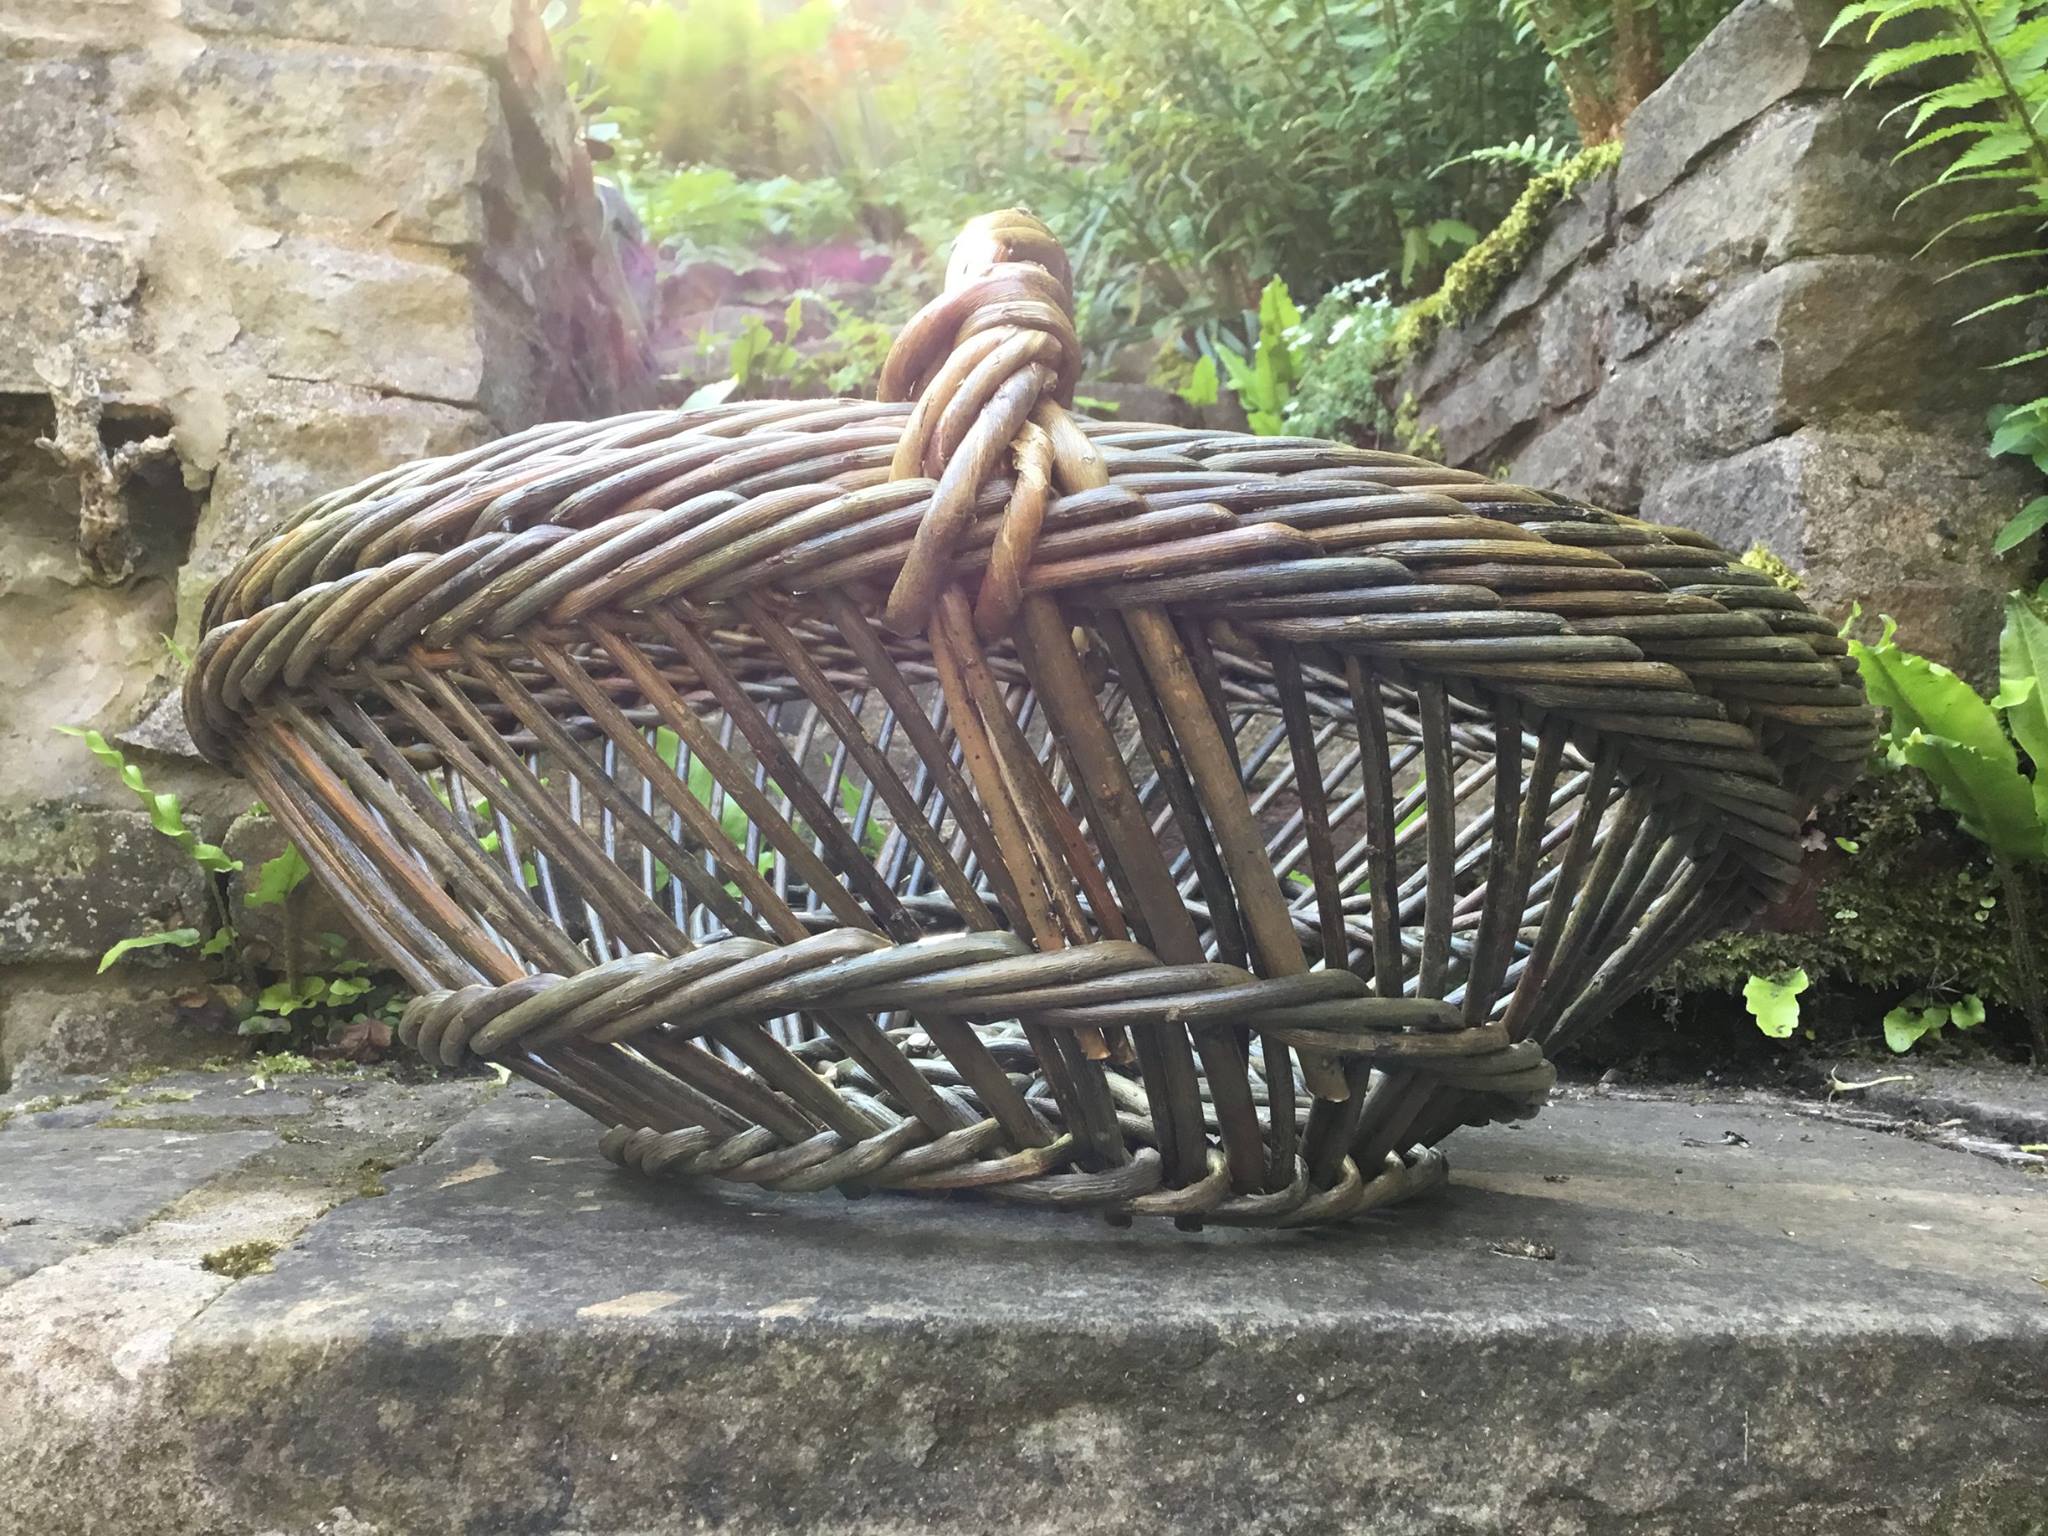 French Perigord Basket Workshop – for experienced weavers